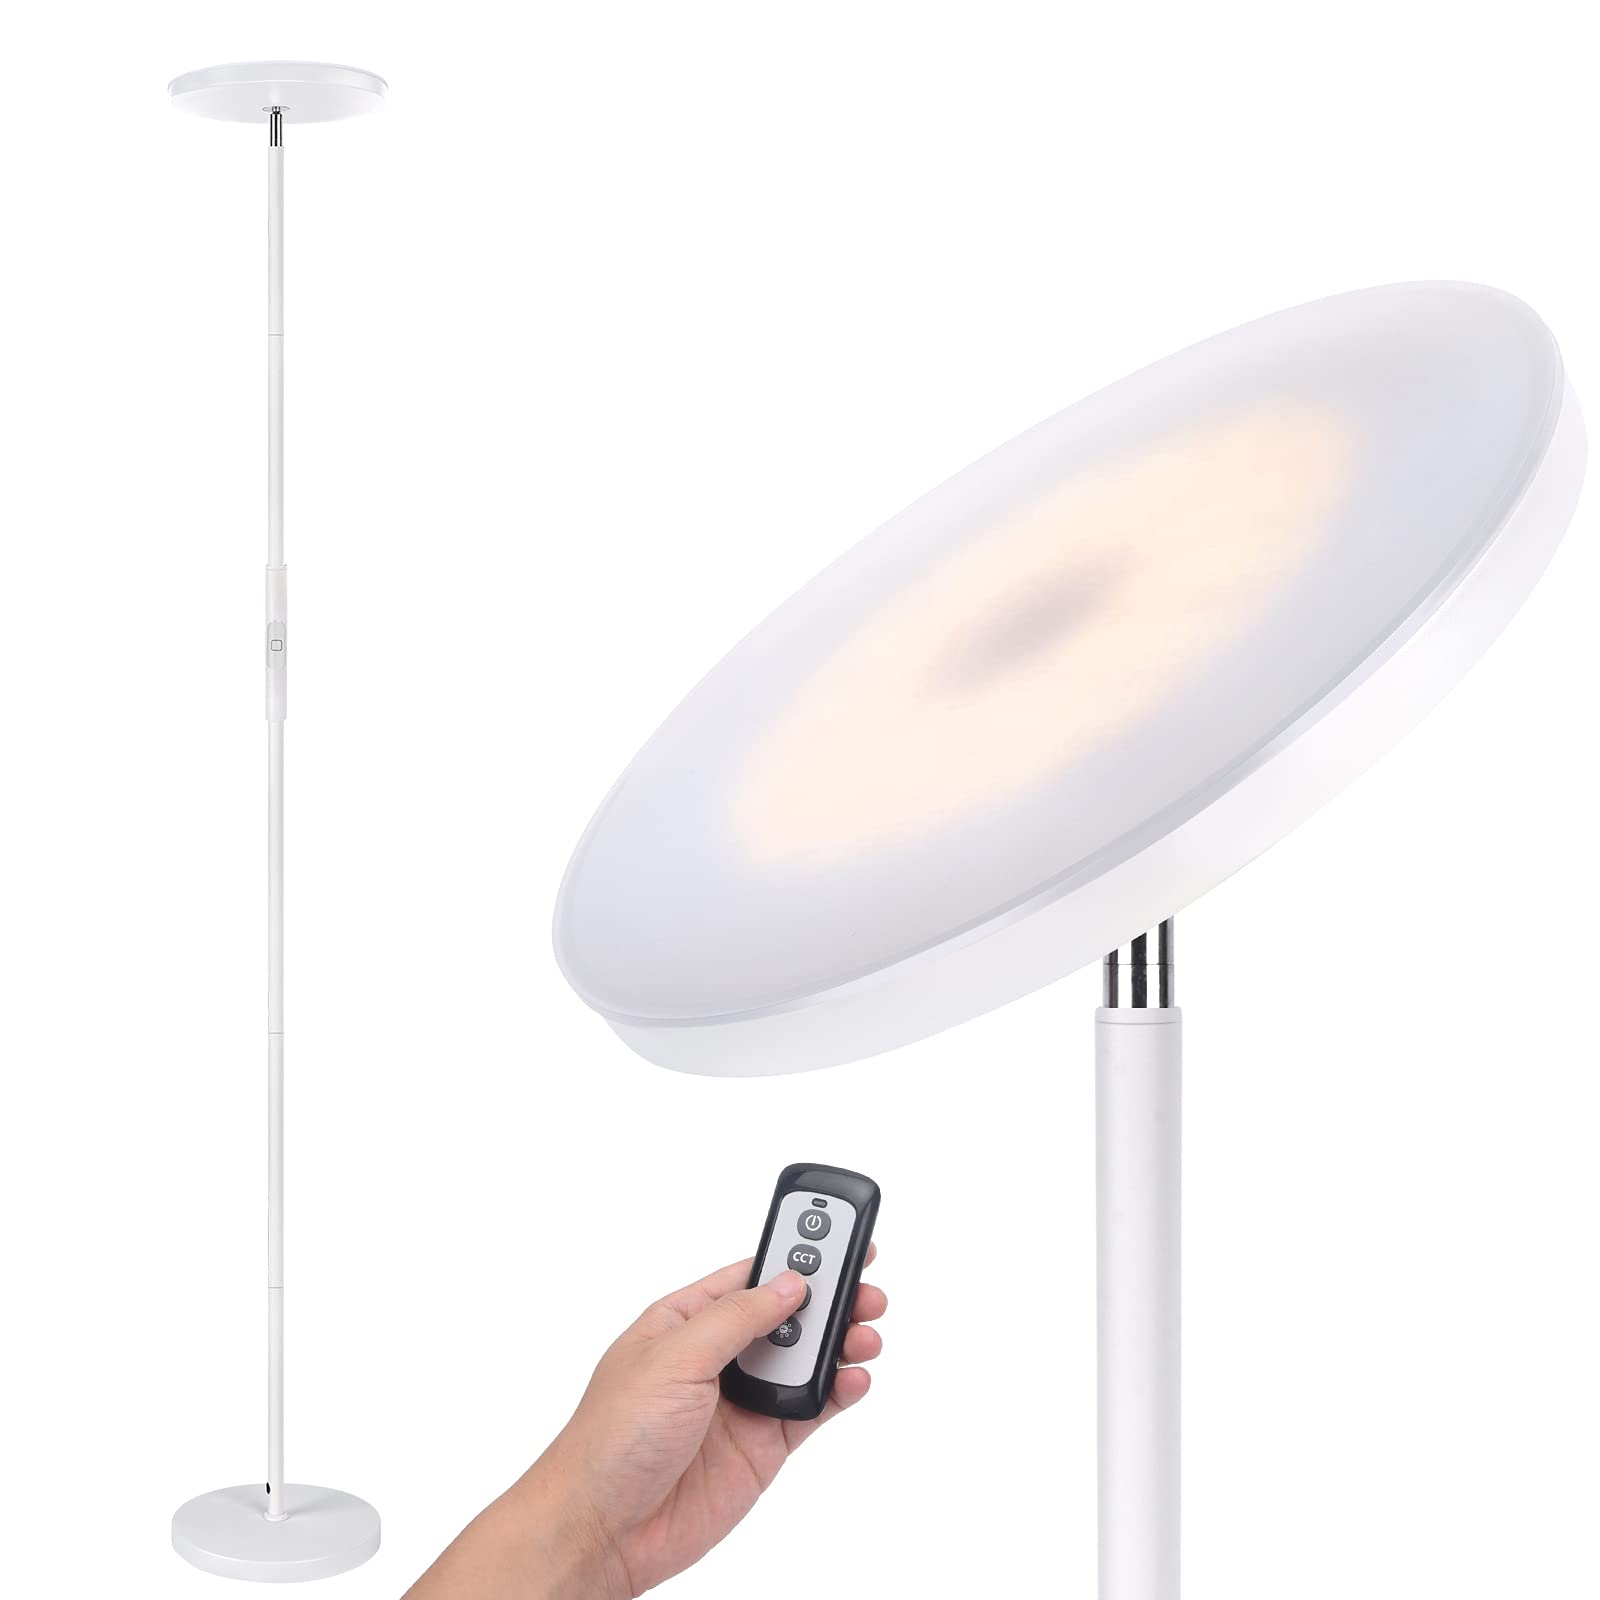 Floor Lamp, 30W 2400lm LED Torchiere Sky Floor Lamps 3 Color Temperatures Dimmable Light with Remote and Touch Control for Bedroom, Living Room, Of...